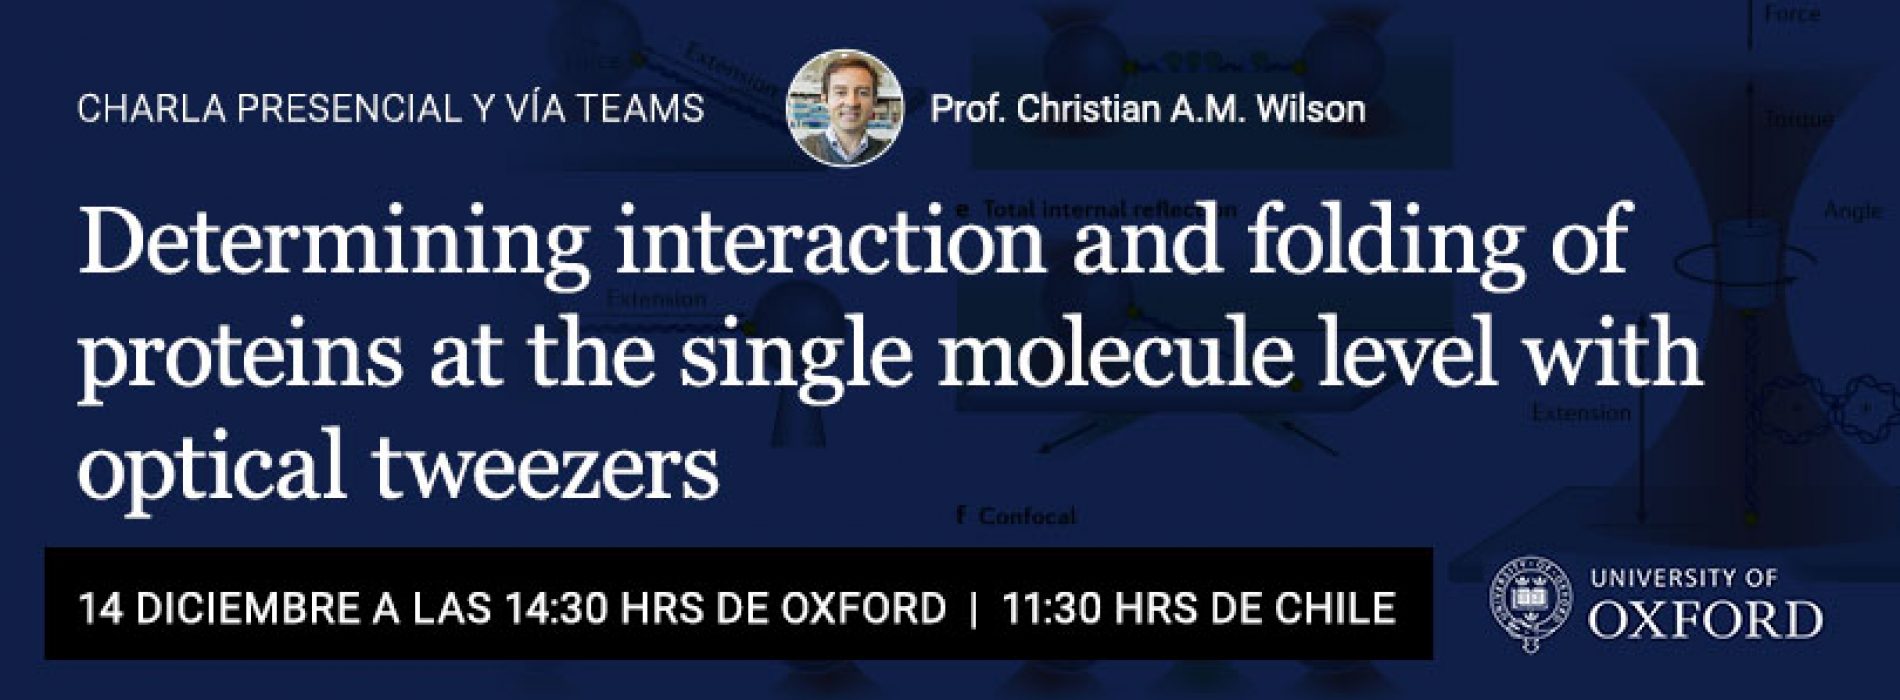 Charla “Determining interaction and folding of proteins at the single molecule level with optical tweezers”